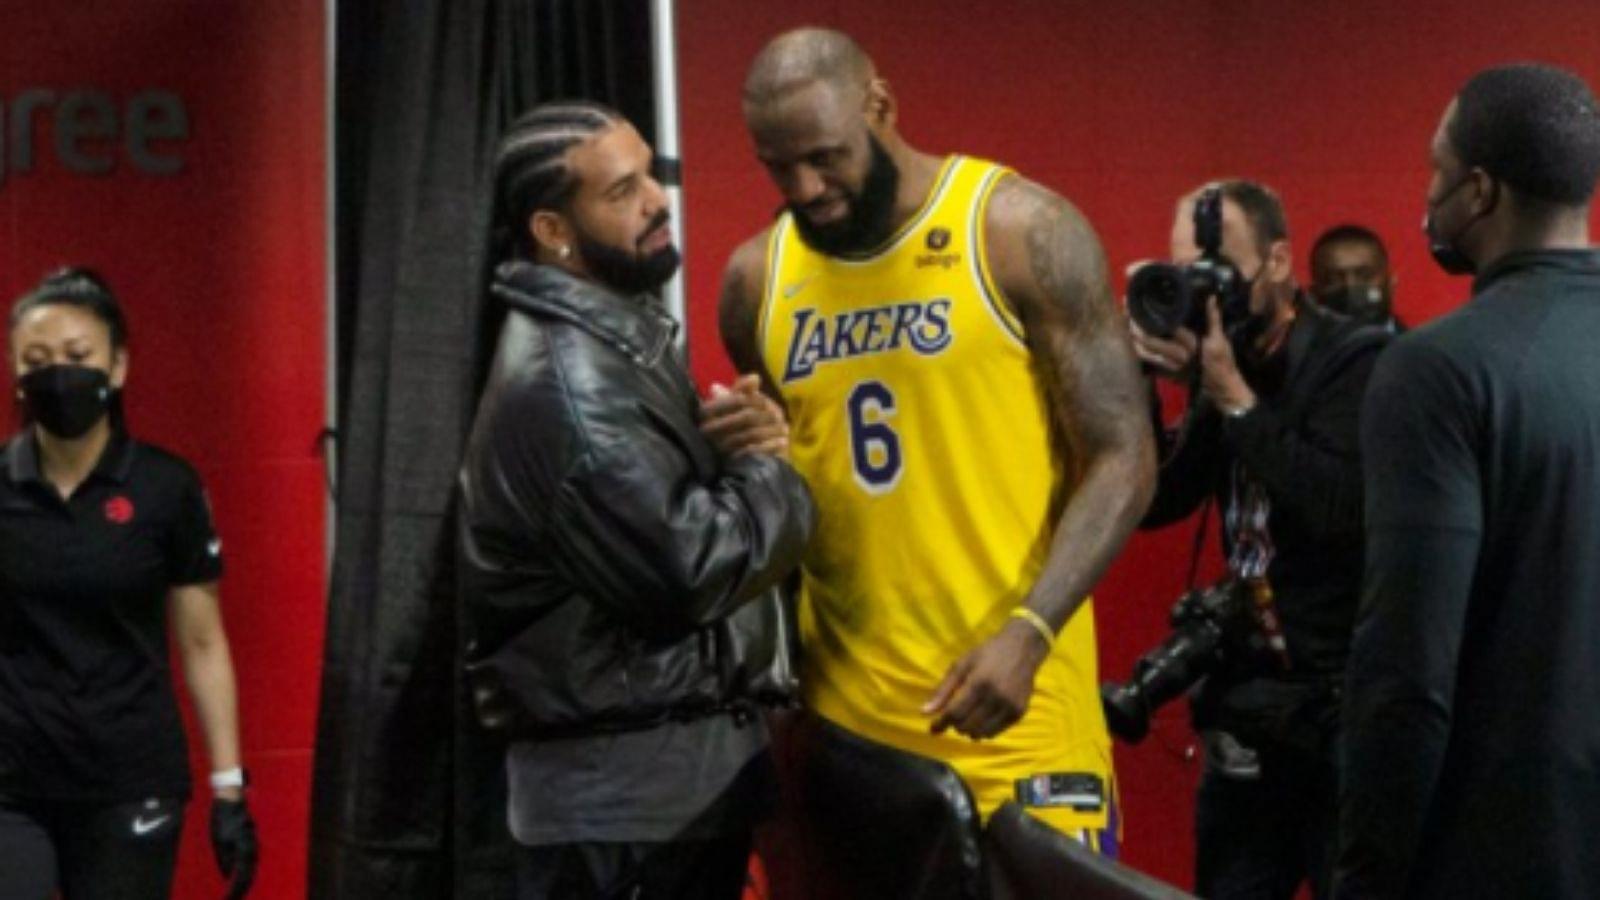 "Drake giving LeBron James $1 million was actually a selfish act": A podcast by 'The Volume' hilariously beaks down Drizzy's self-centeredness in aiding Lakers superstar